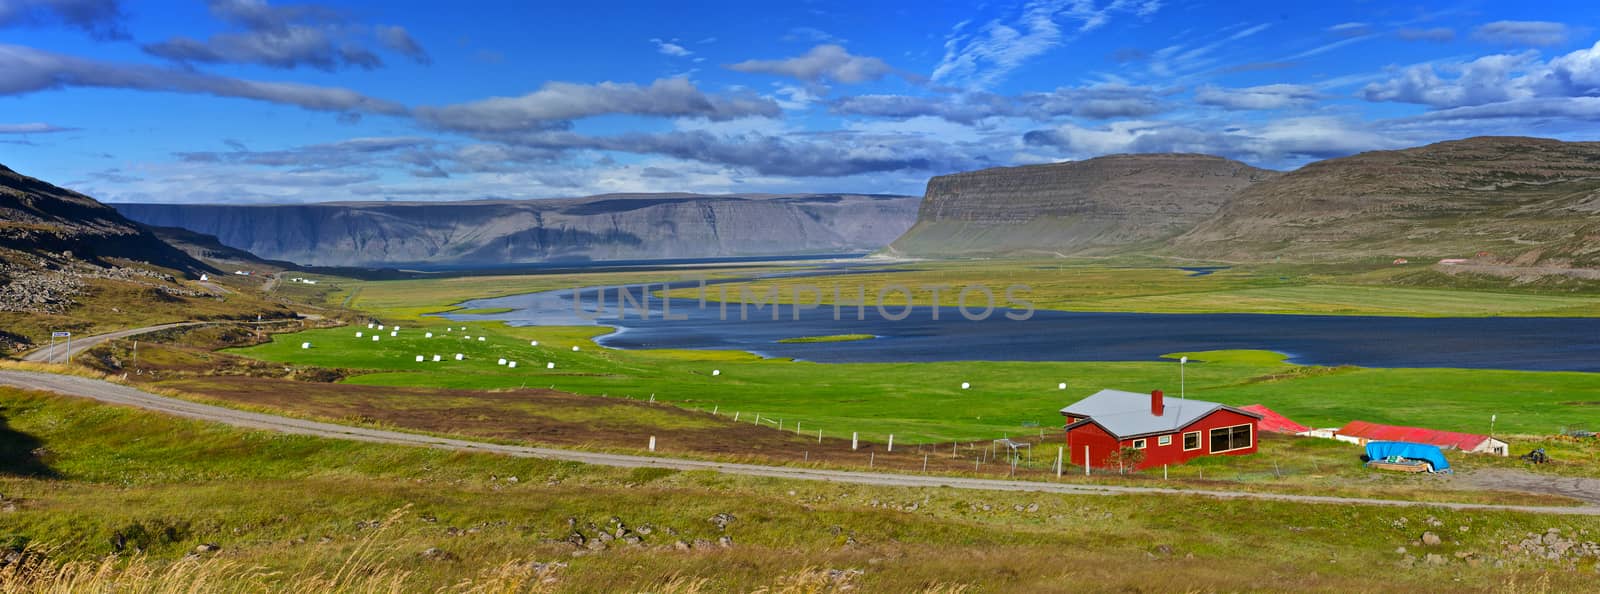 Beautiful red house in Iceland. Mountains, fjord, hay bales on the meadow in background. Panorama